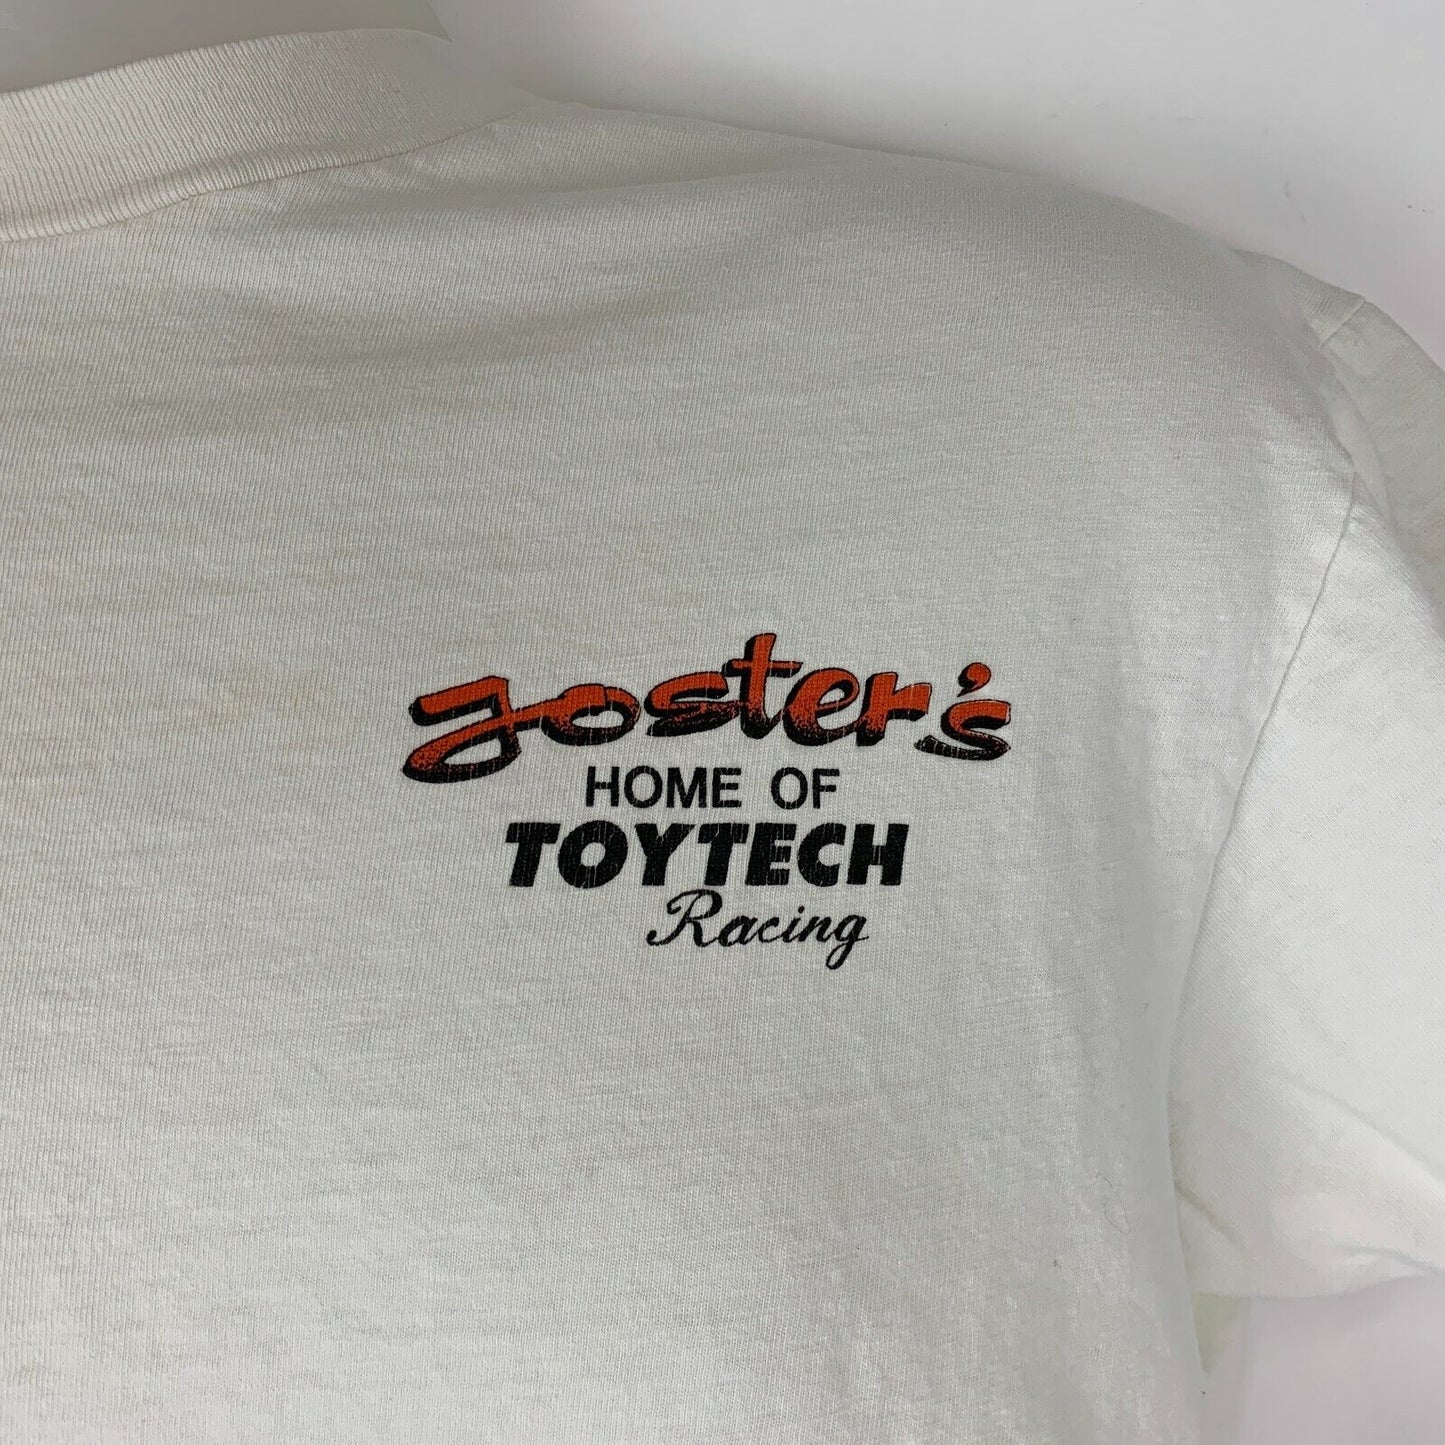 Fosters Scale Auto Racing ToyTech Vintage 80s T Shirt Slot Car Slotracing Tee XL